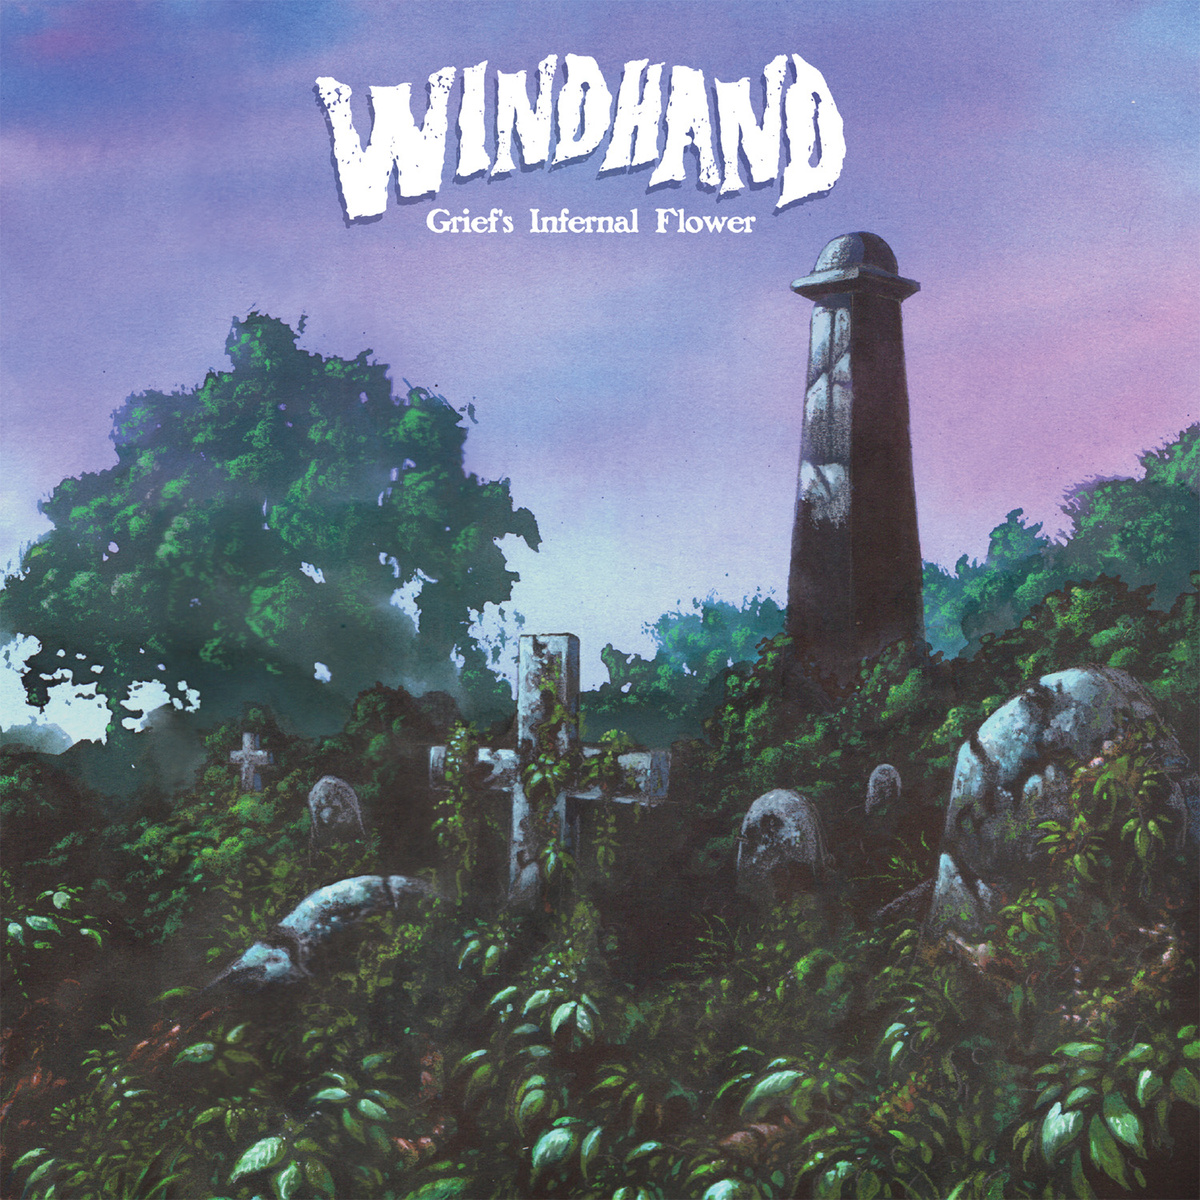 Review of 'Grief's Eternal Flower' the new album by Windhand